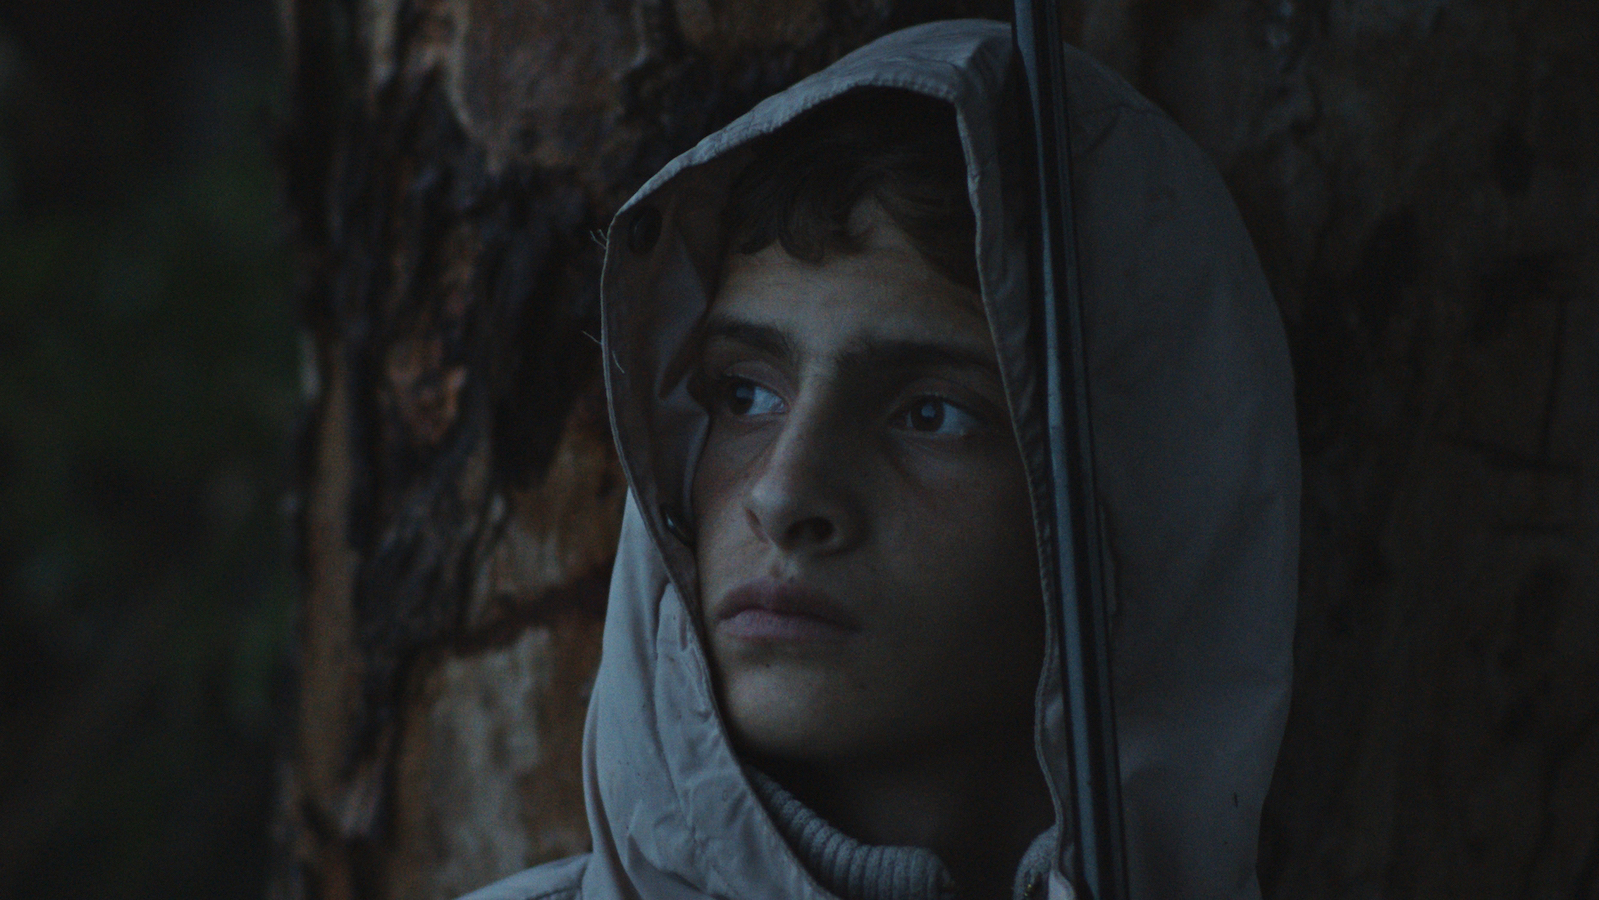 A young melancholy boy, his face draped by a hood, looks off-camera.